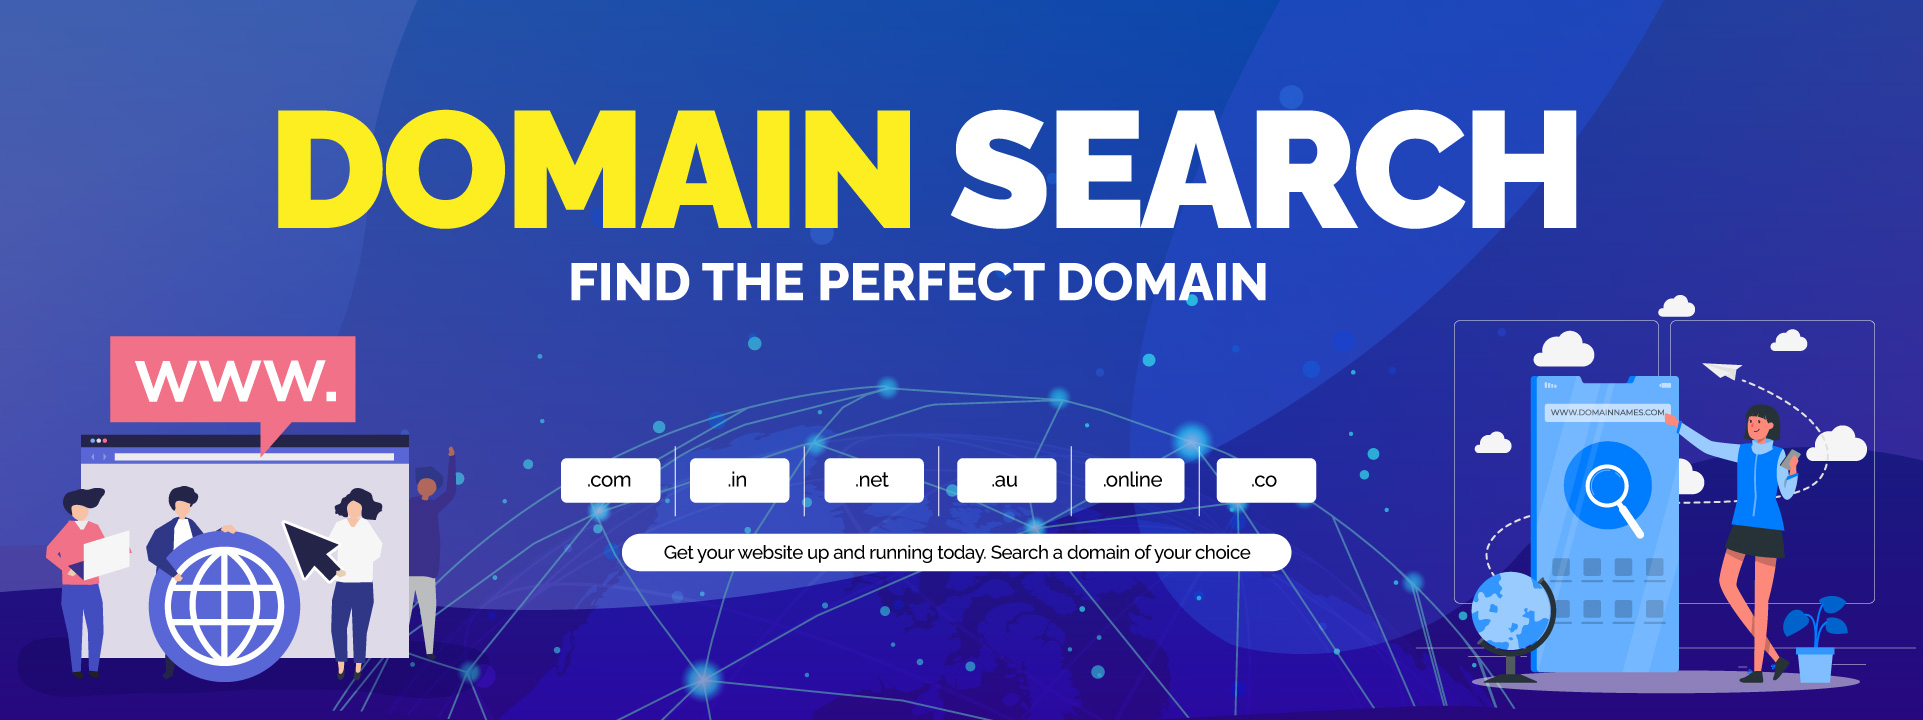 search a domain of your choice